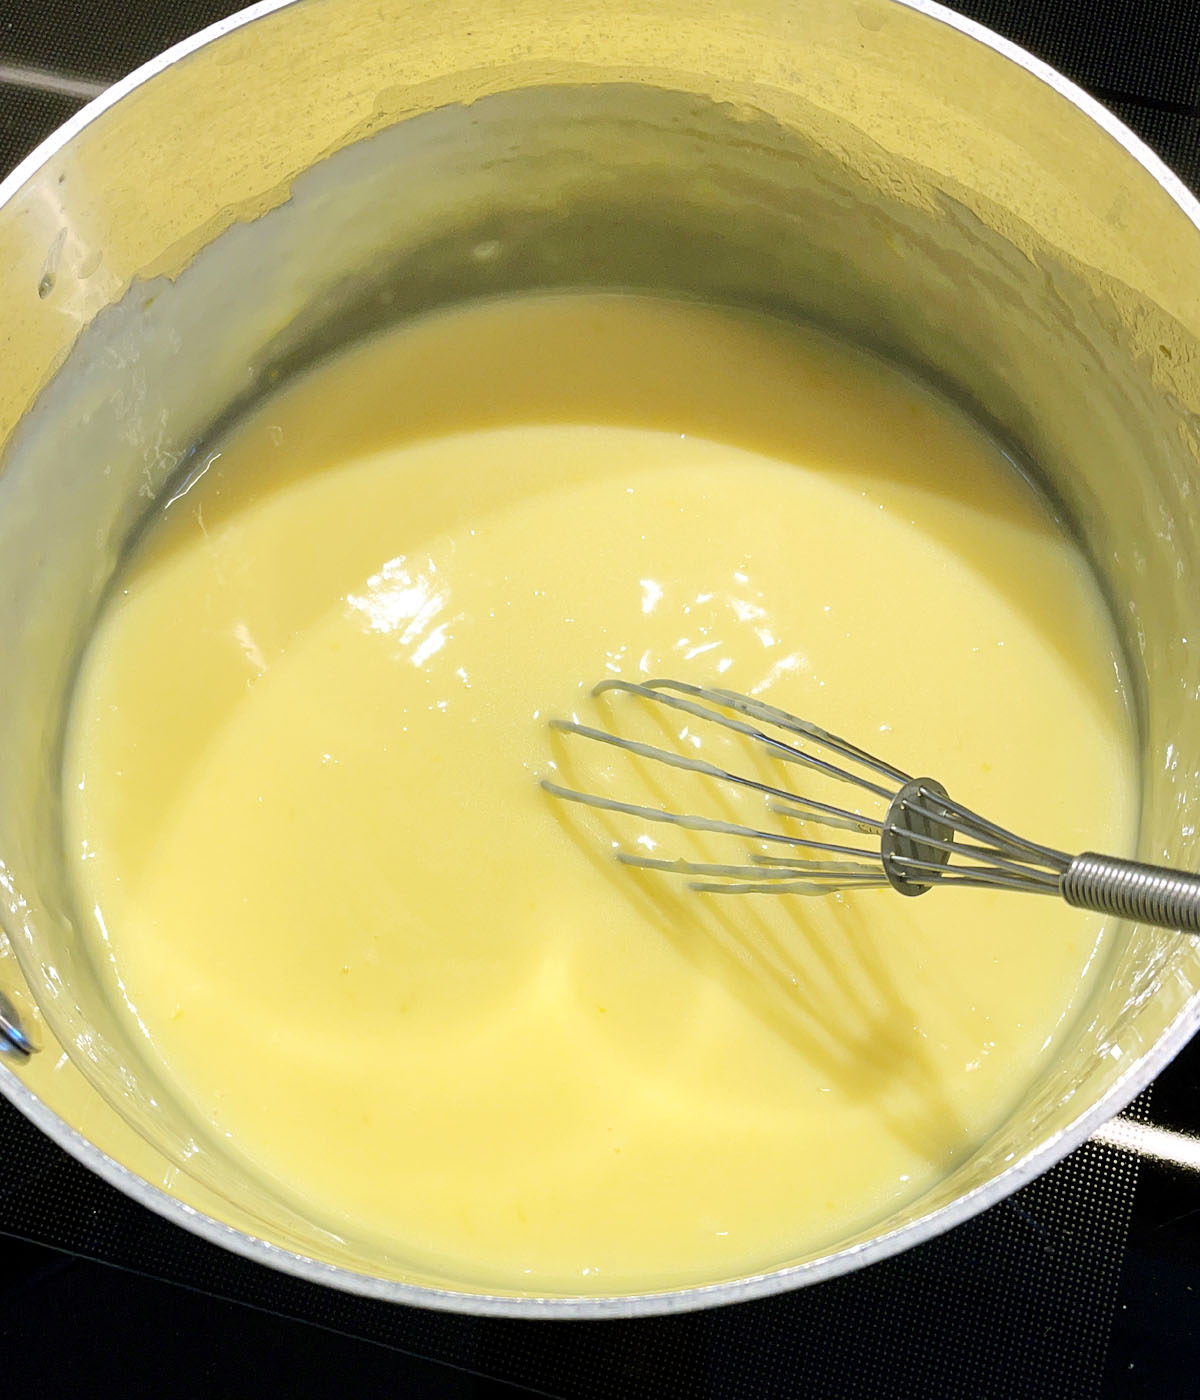 A whisk in a pot containing yellow pudding.